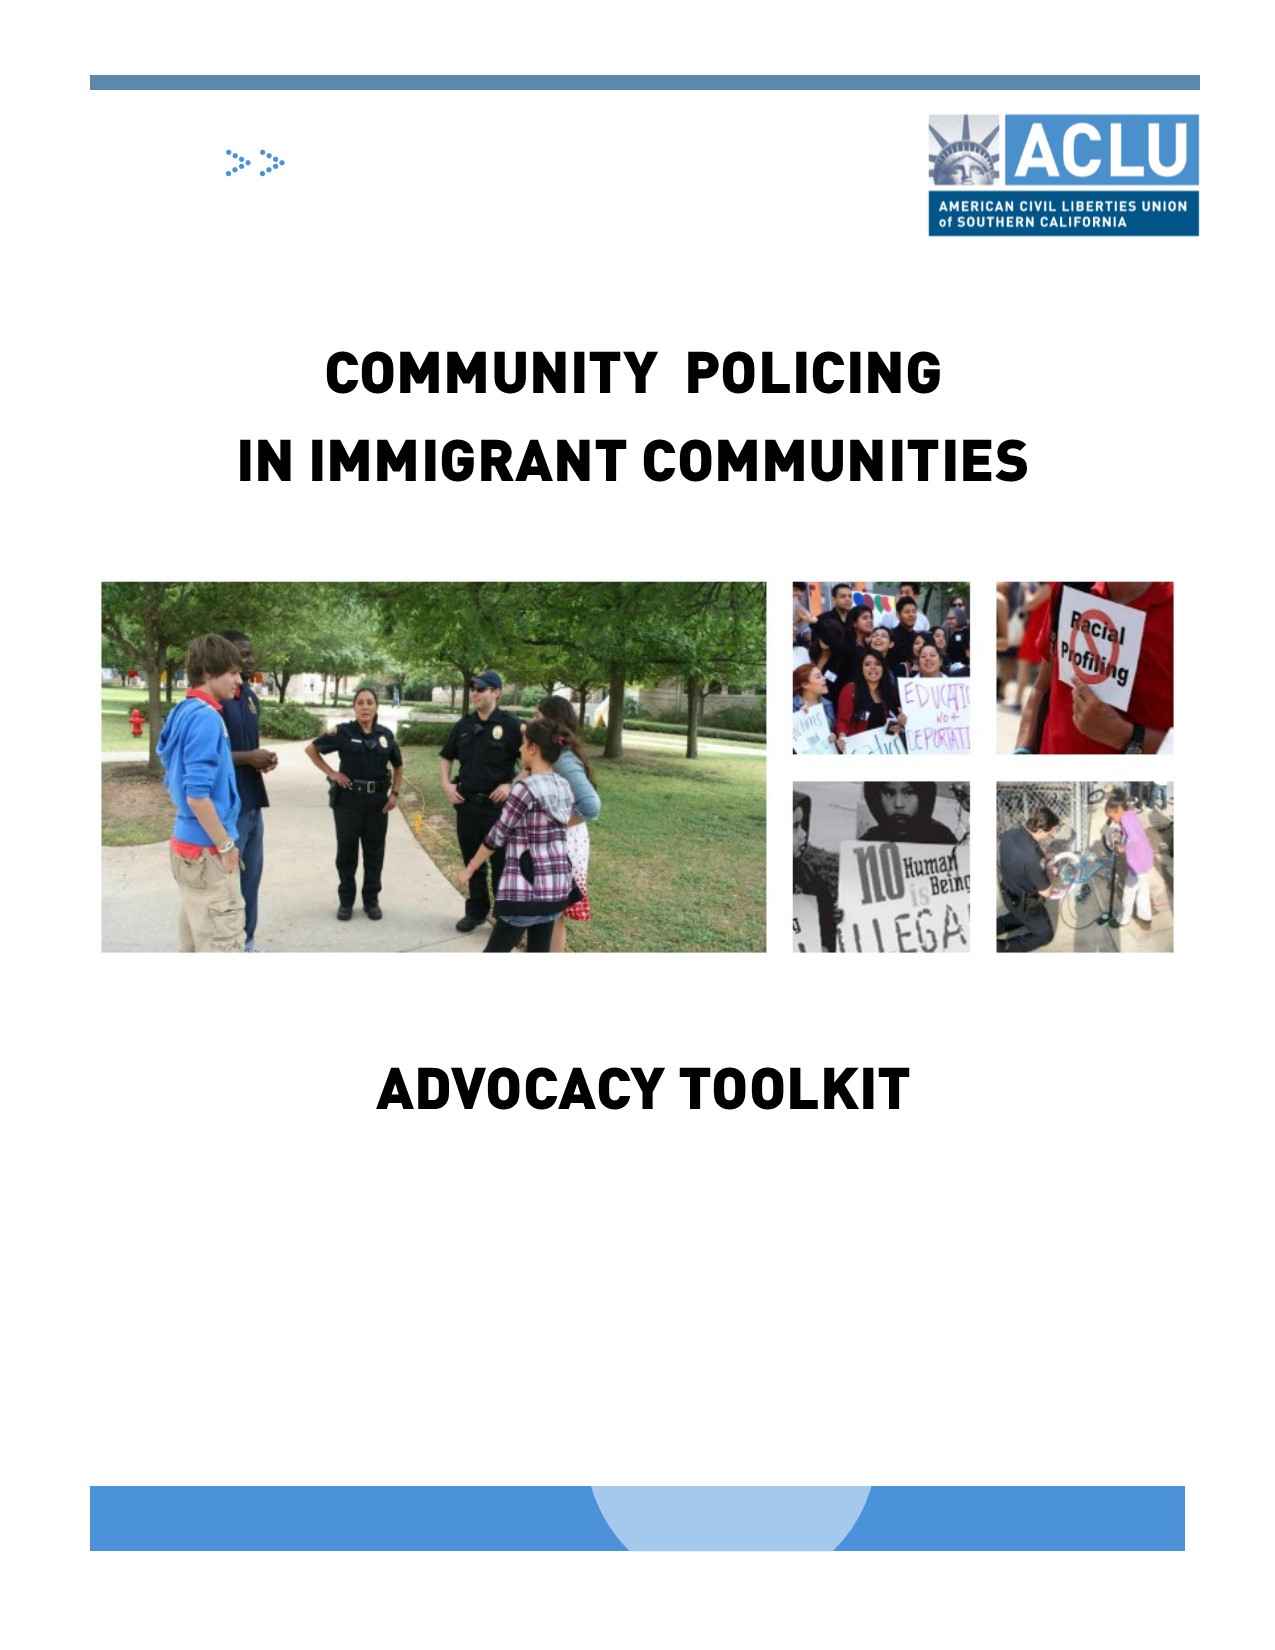 Community Policing in Immigrant Communities: Advocacy Toolkit